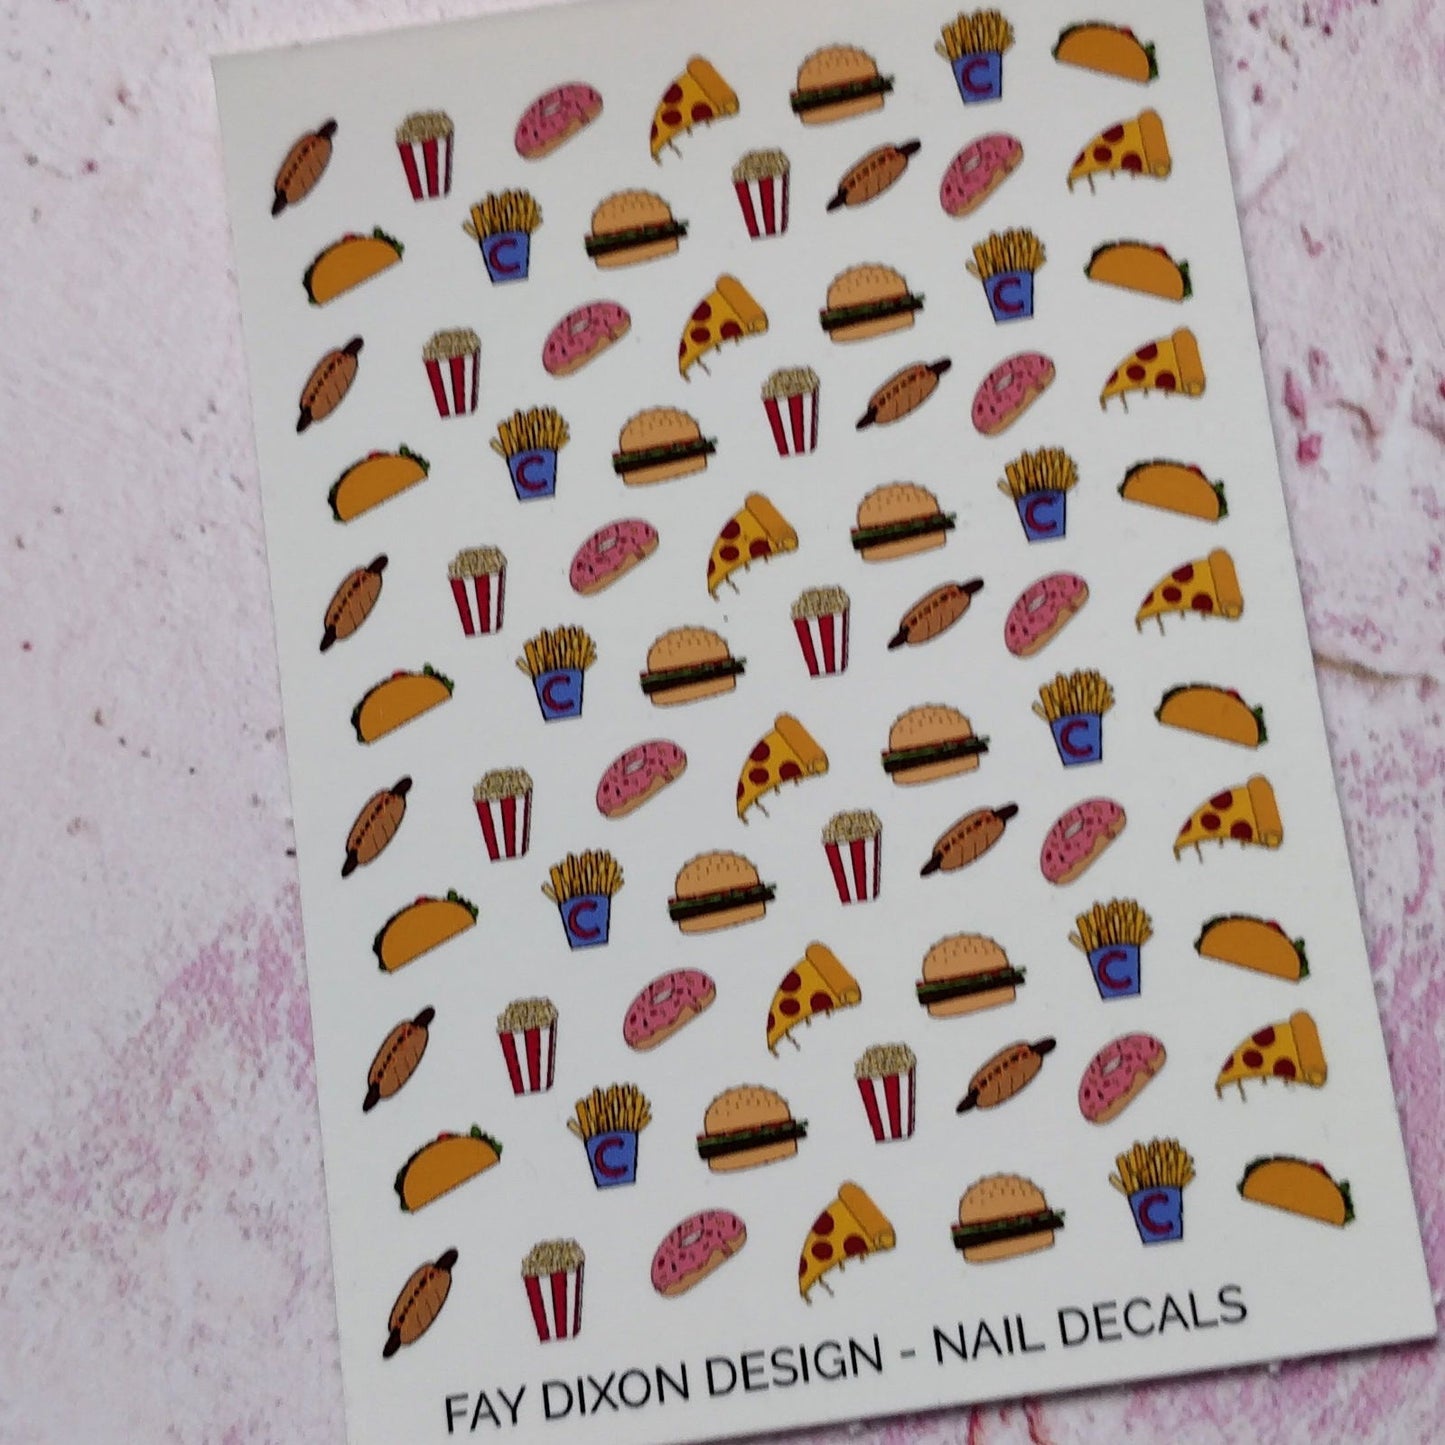 Fast Food Waterslide Nail Decals - Fay Dixon Design